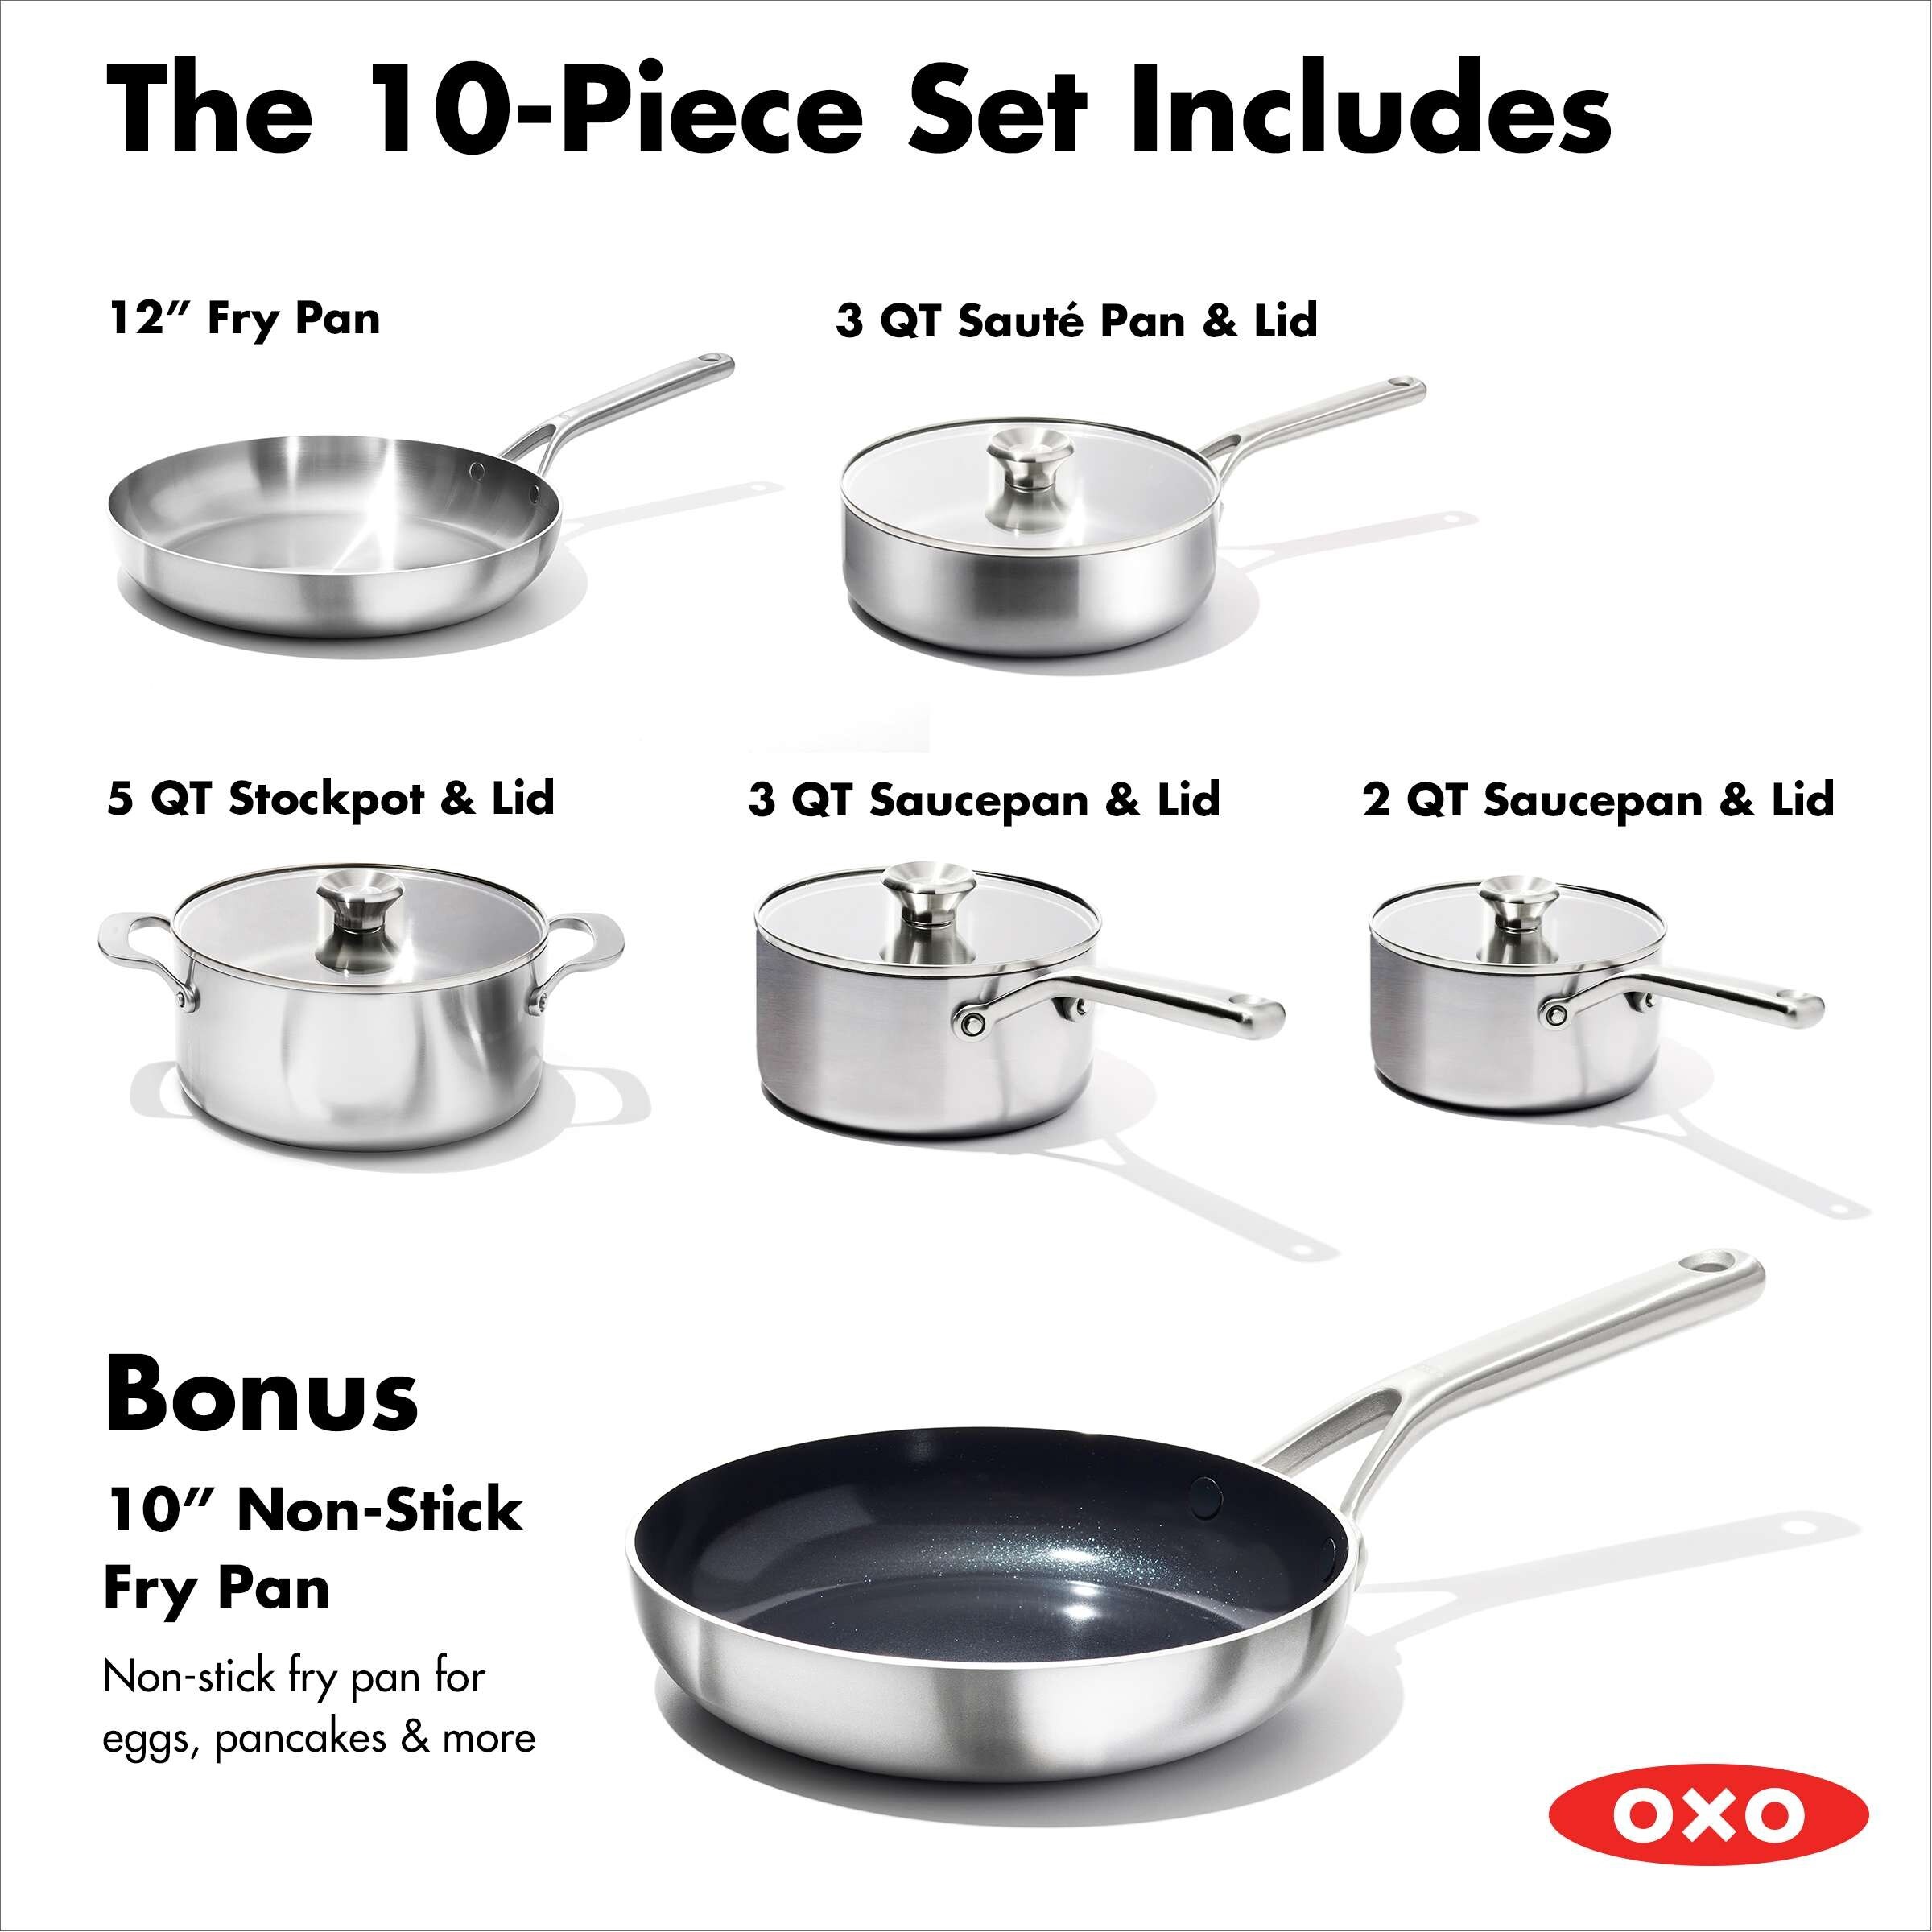 OXO Mira 3-Ply Stainless Steel Stock Pot with Lid, 5 Qt - Bed Bath